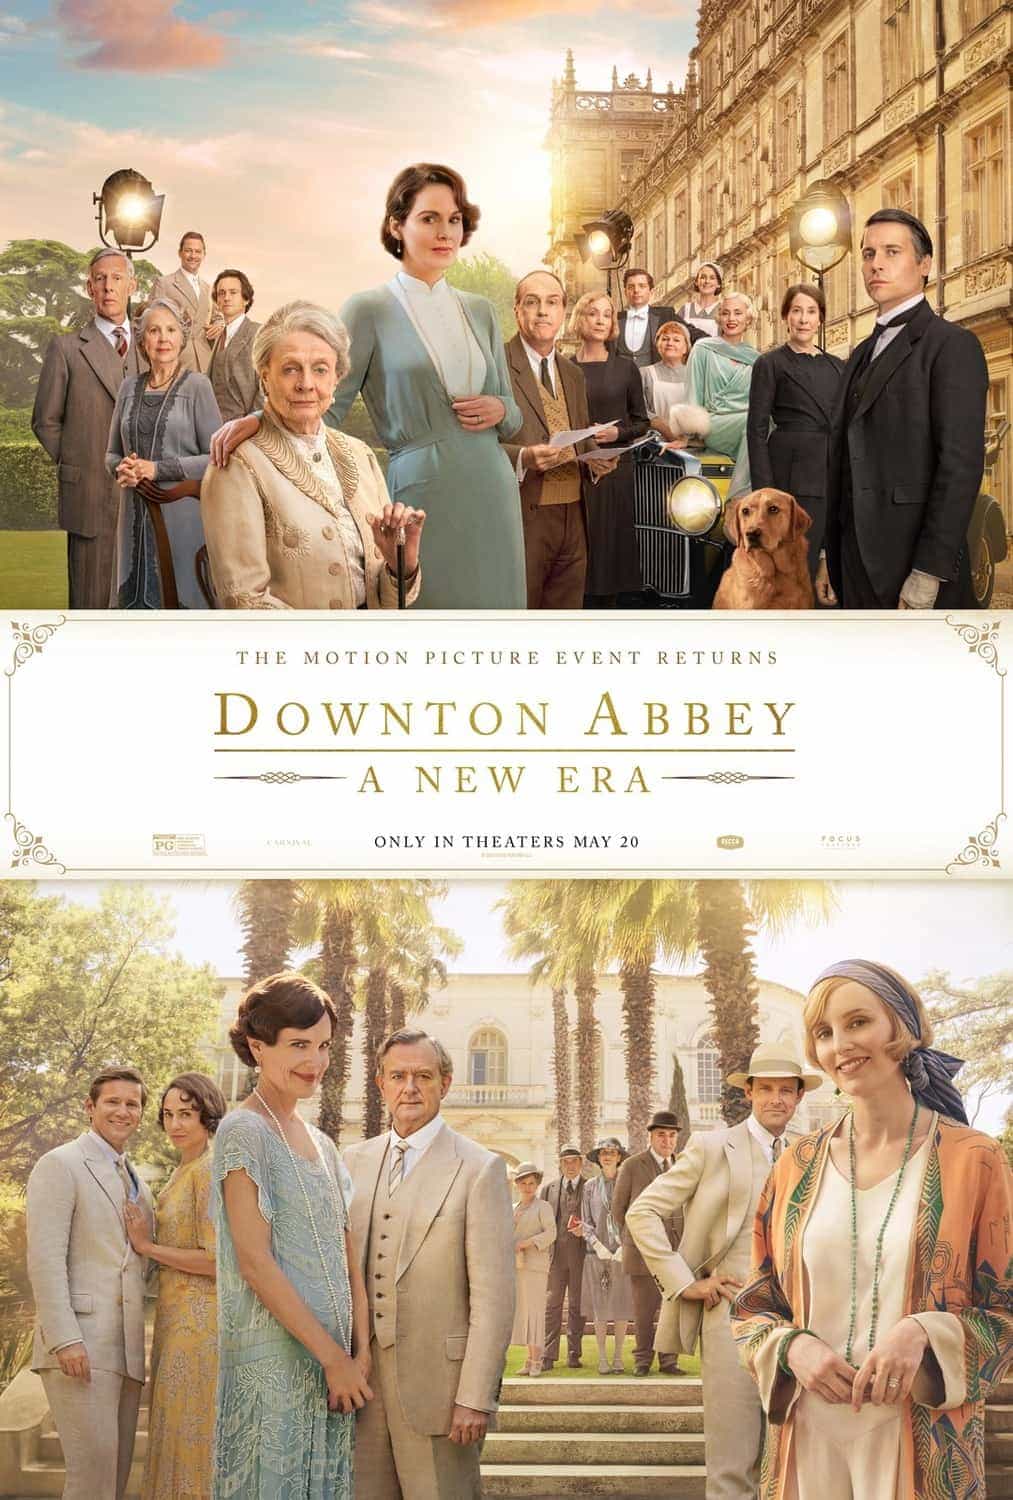 Downton Abbey 2 gets a new title and release date